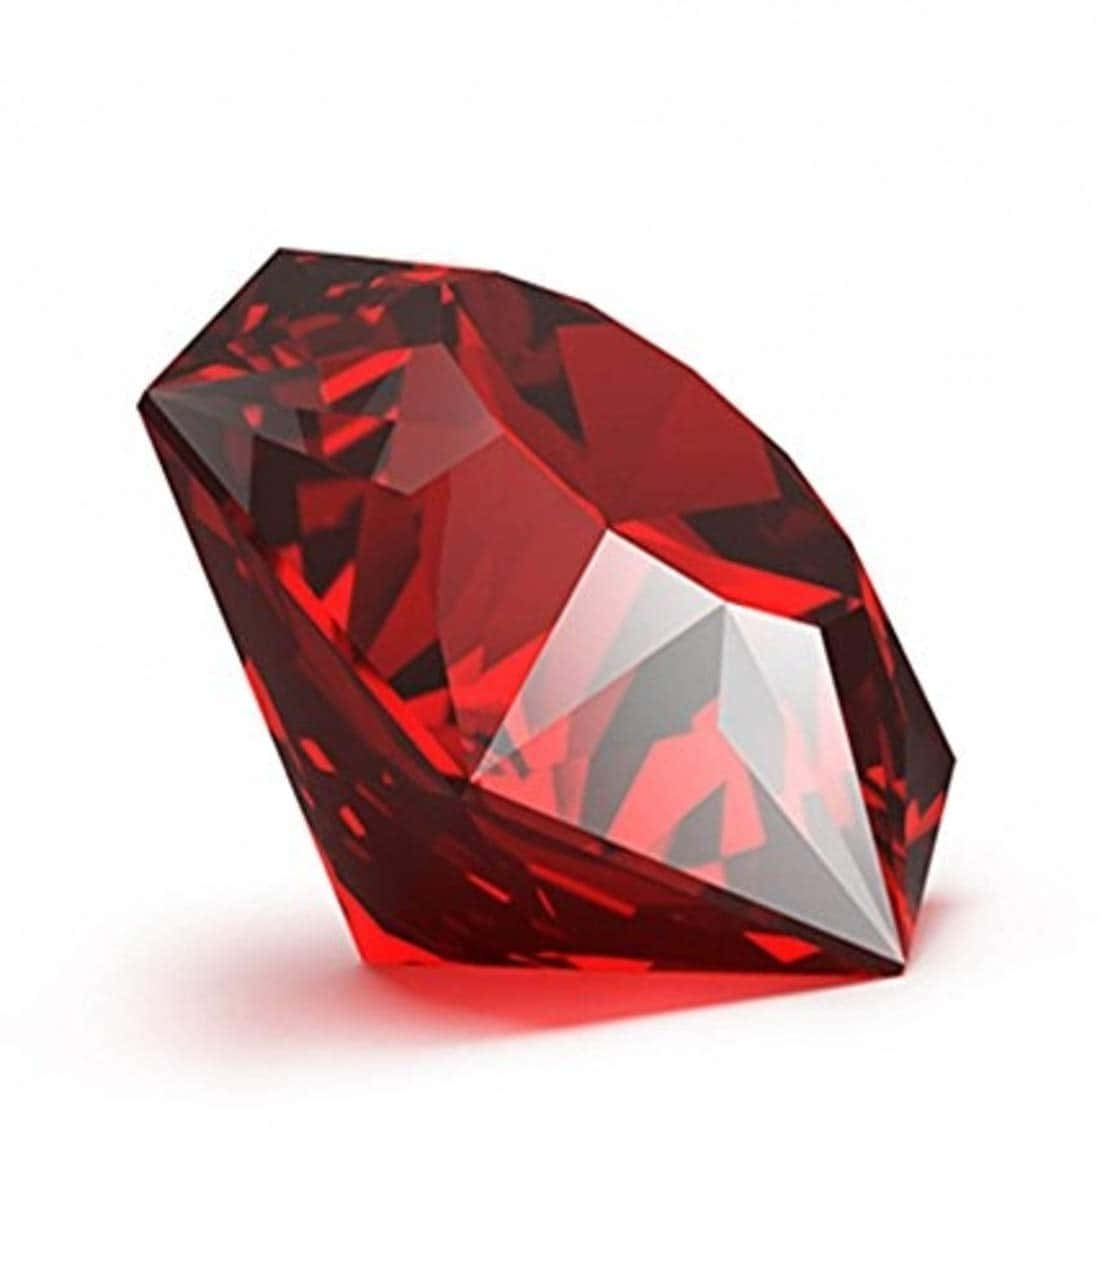 Exquisite Red Diamond in High Definition Wallpaper